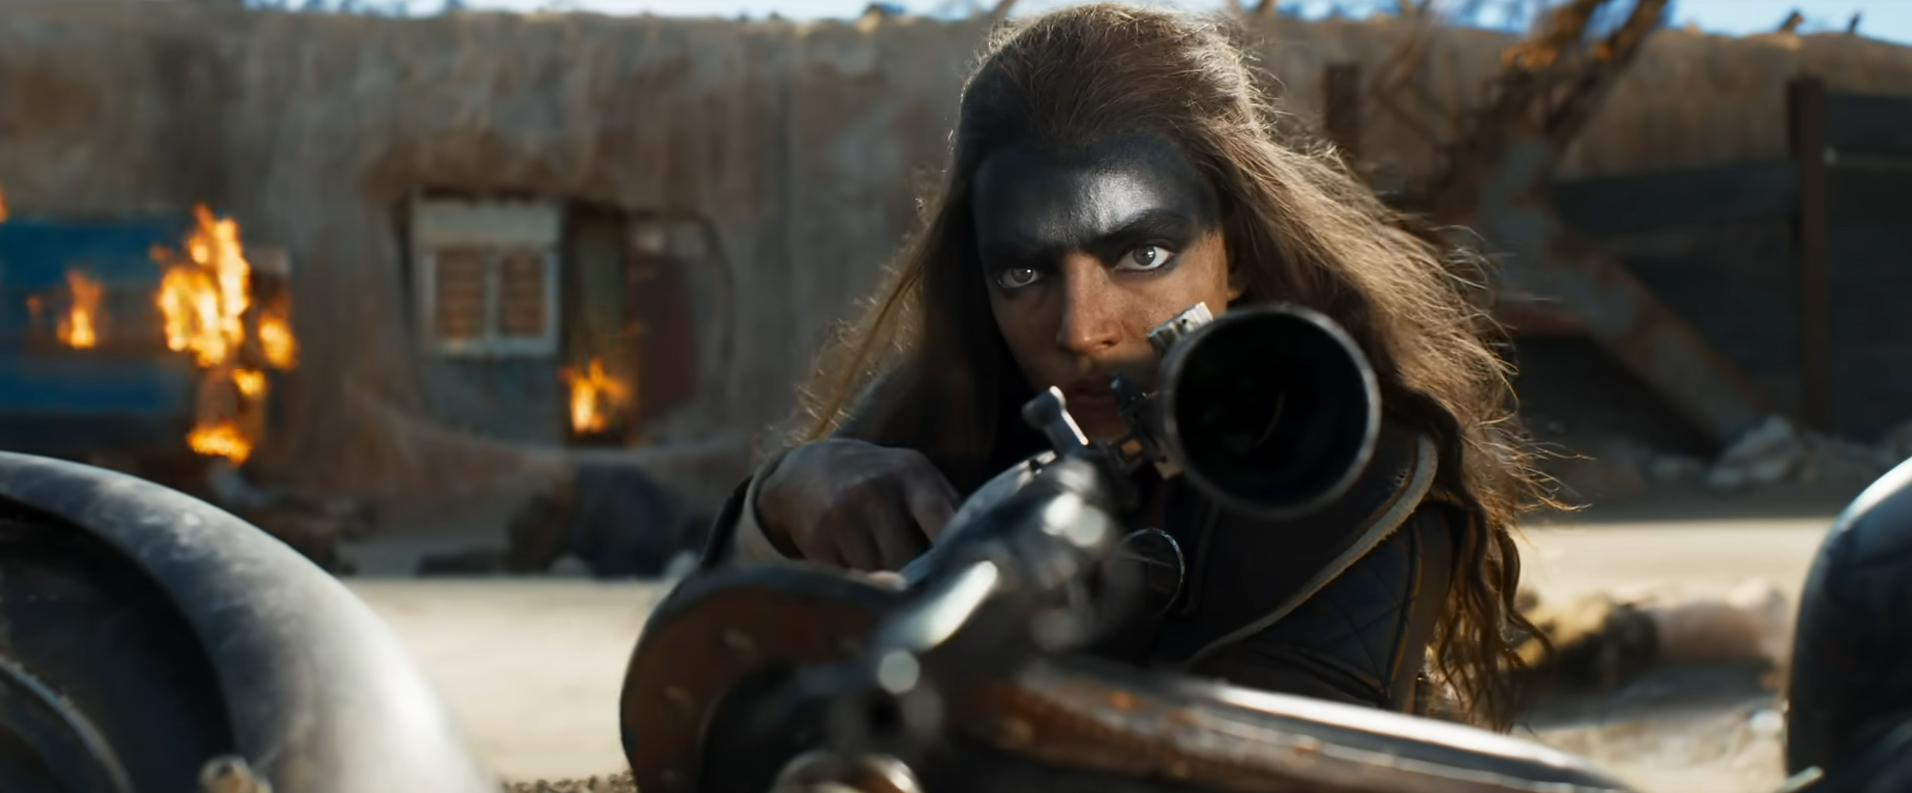 Anya Taylor-Joy as a Furiosa in Furiosa holding a sniper rifle with grease painted on her forehead 